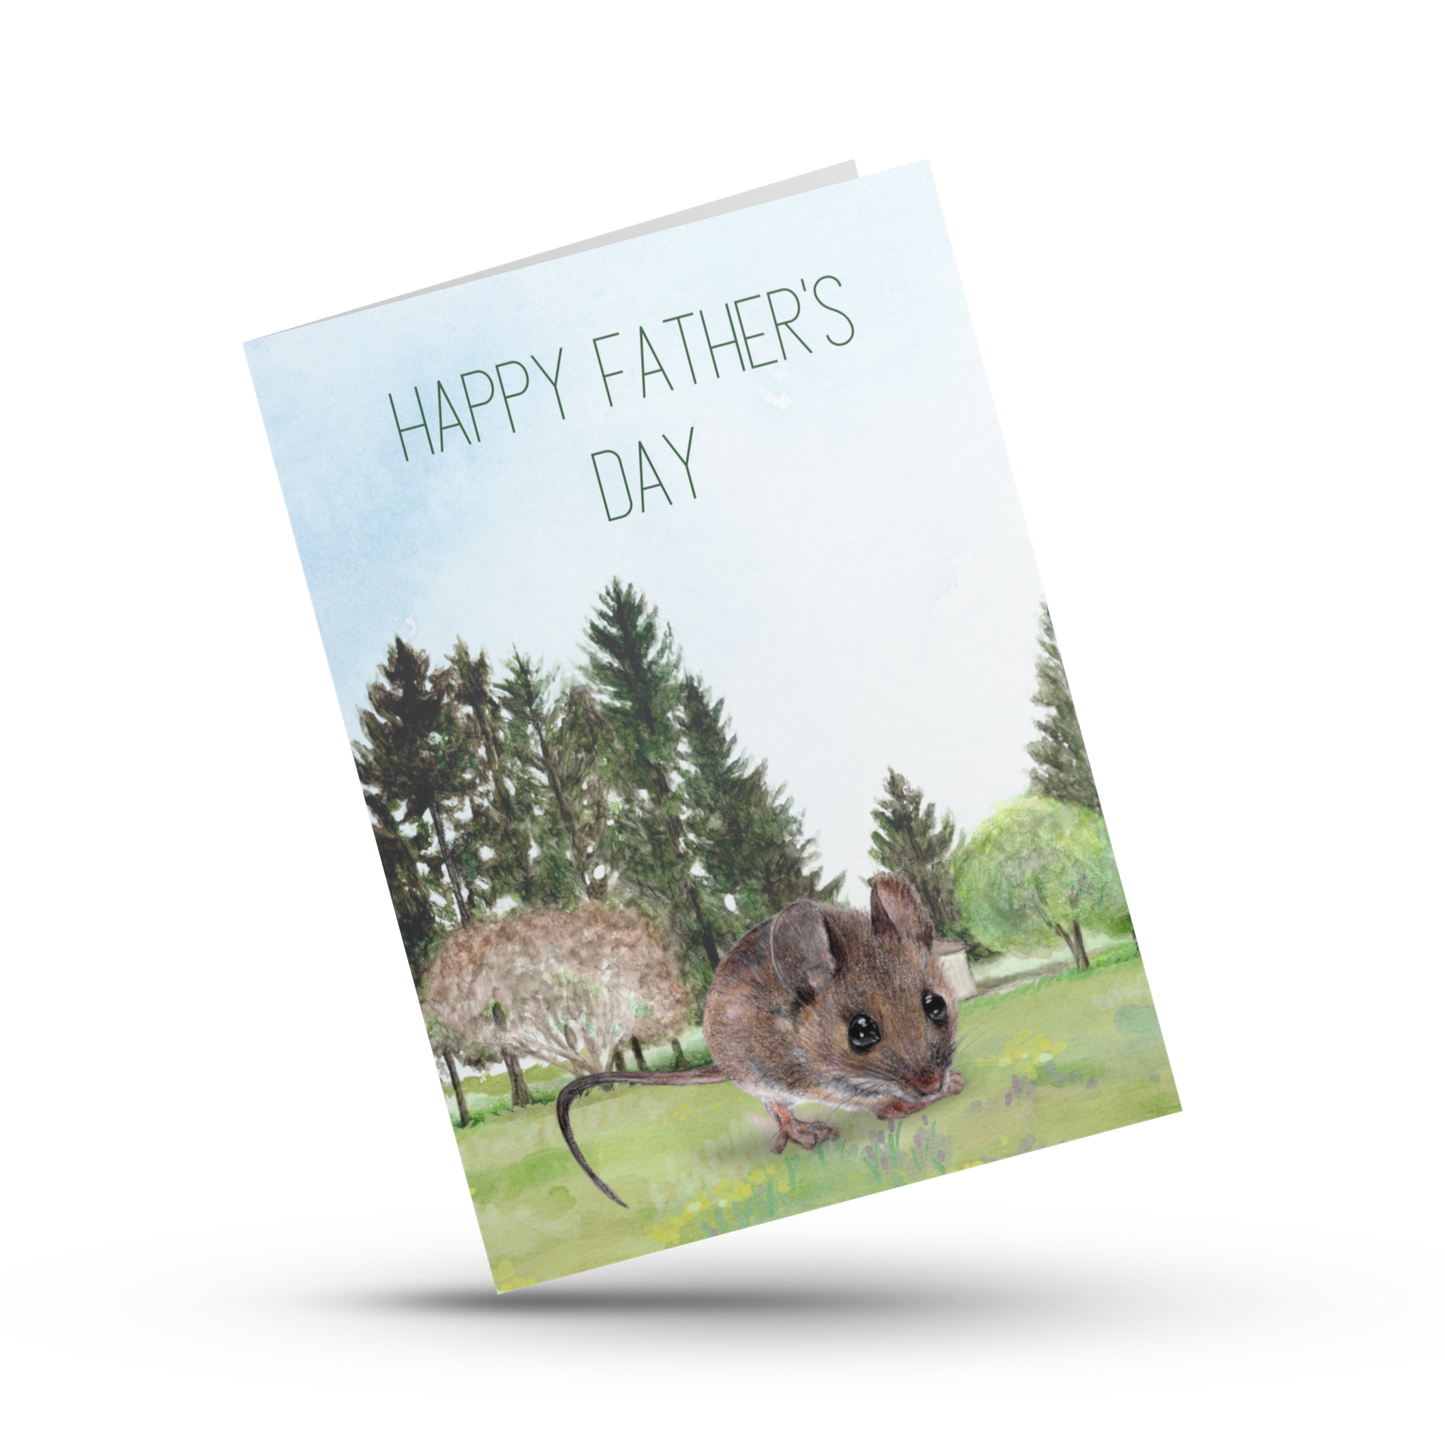 Happy Father's day card, Cute field mouse card, Nature greeting for dad, For husband, For Grandpa, Outdoorsy whimsical cottage card for him